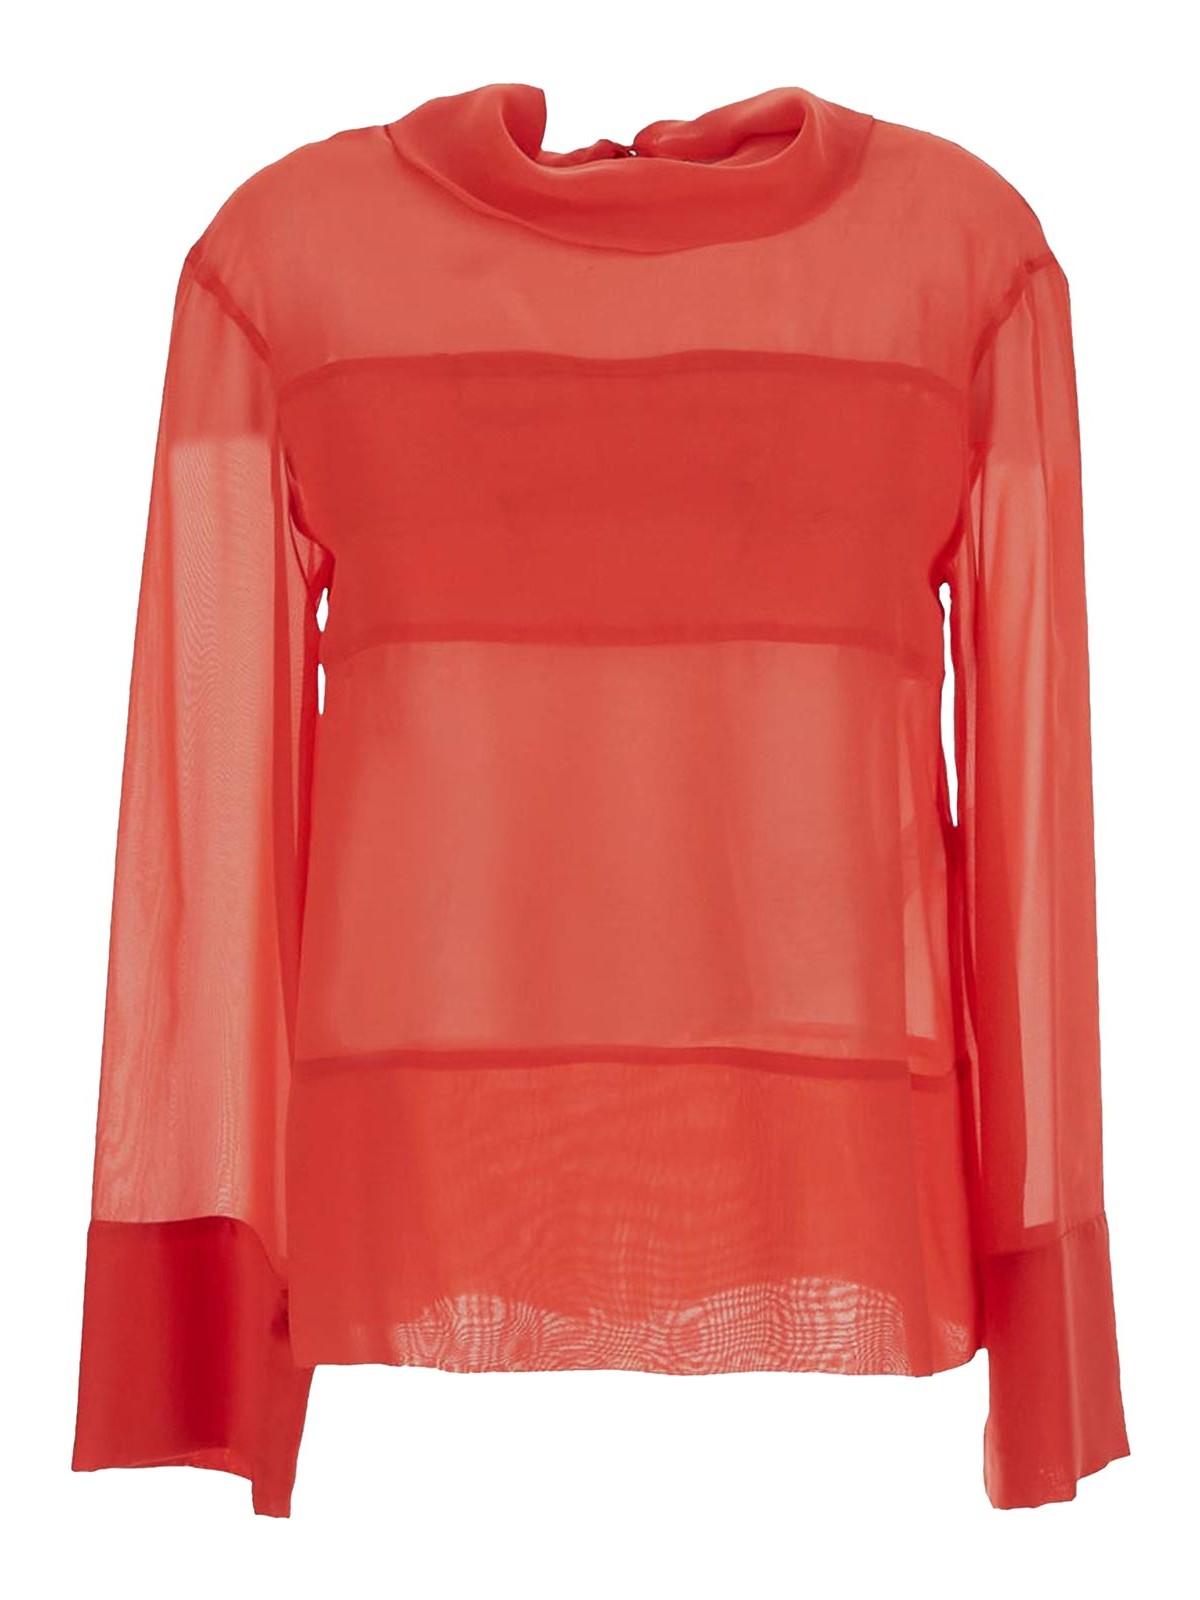 Shop Erika Cavallini Chiffon With Cowl High Neck In Red